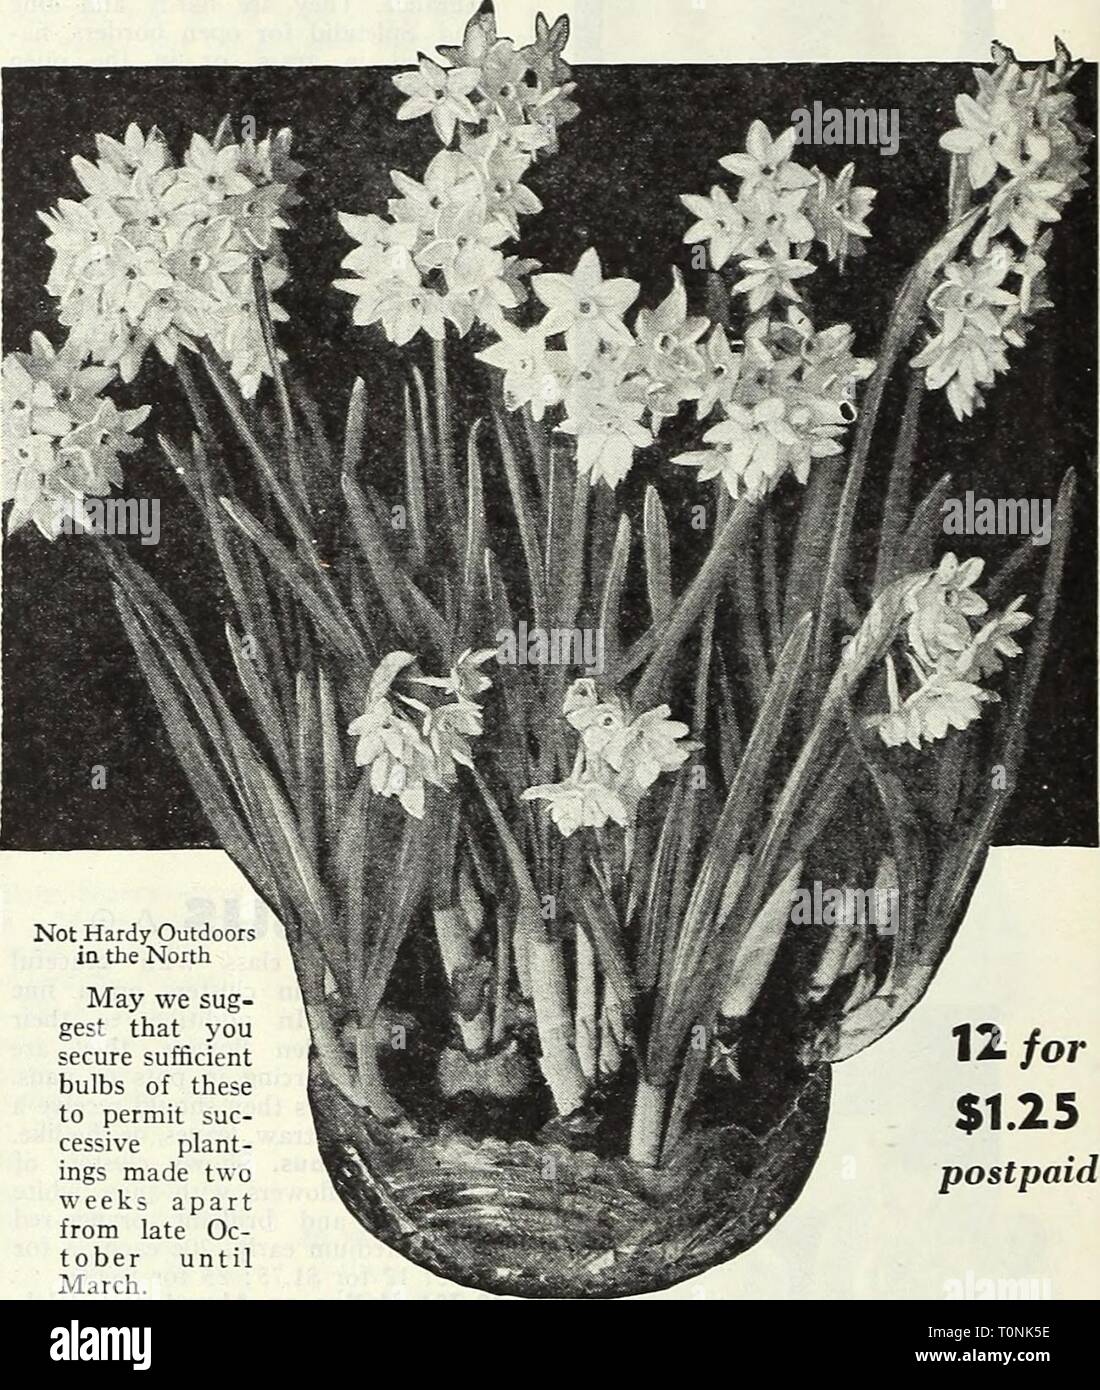 Dreer's autumn 1946 planting guide Dreer's autumn 1946 planting guide  dreersautumn19461946henr Year: 1946  Triandrus albus 40-806 Triandrus a'bus (Angels Tear). A perfect little gem with graceful nodding blooms in which the creamv white perianth petals are facing upward and the pure white cup is fully exposed to view. It re- sembles a miniature C'clamen. Give it a gritty soil as it likes good drainage. 6 in. 20c each; 3 for 4Sc; 12 for $1.60; 25 for $2.75; 100 for $10.00. 40-80Z W. P. Milner. A m.ore vigor- ous variety which also may well be used in borders because it is de- cidedly persiste Stock Photo